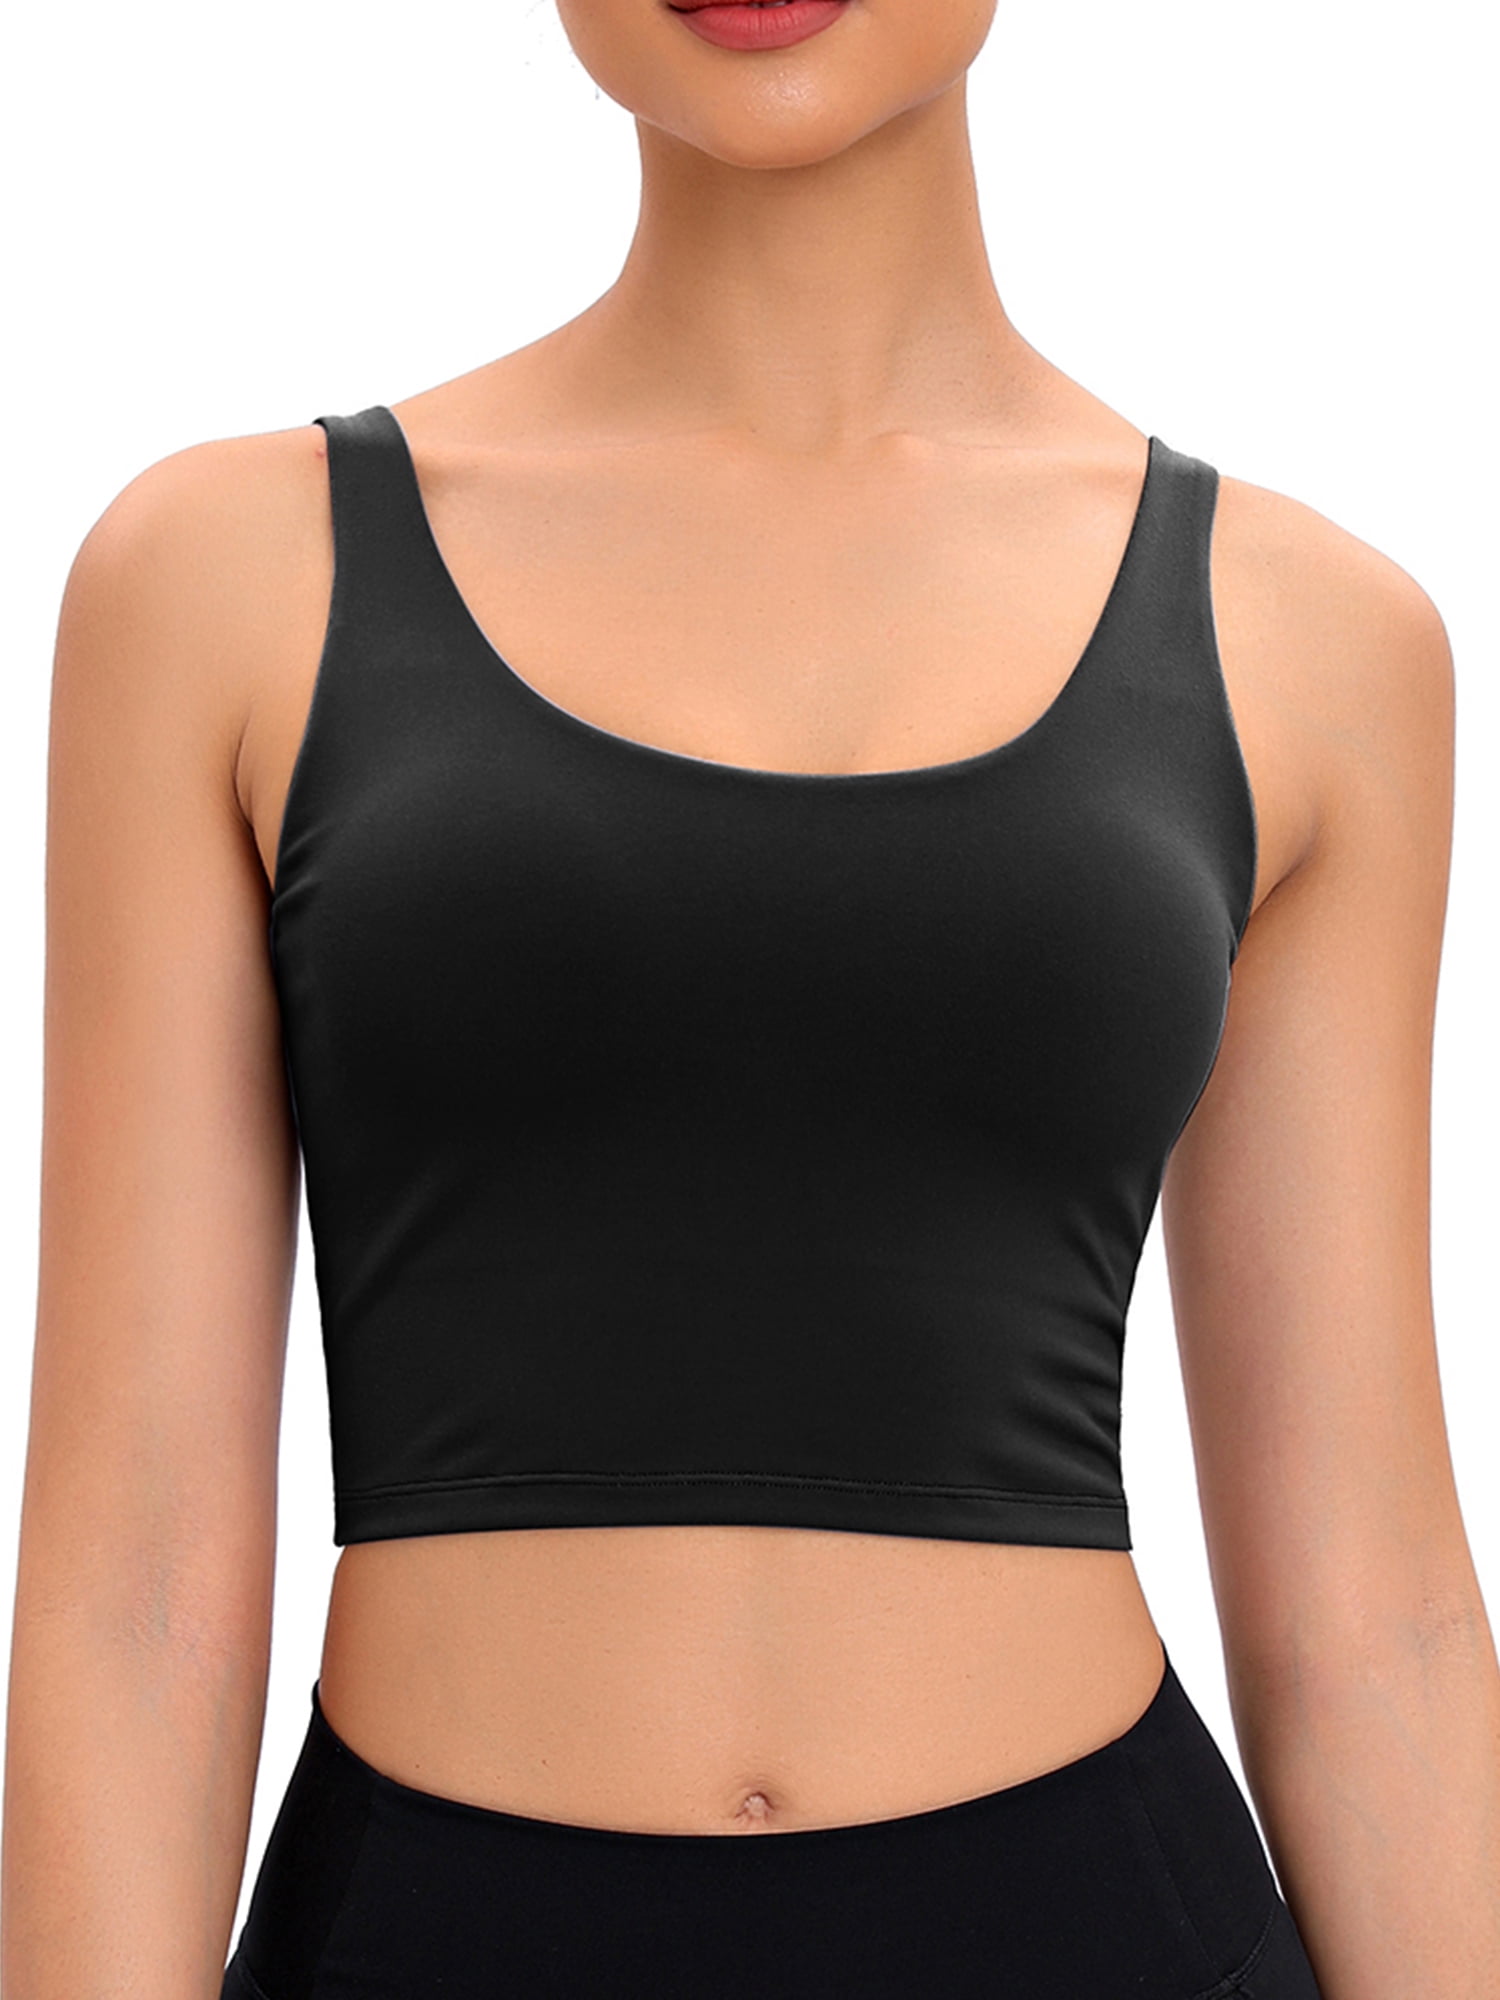 Buy DISOLVE Women's Seamless Bra Workout Crop Top Tank Tops for